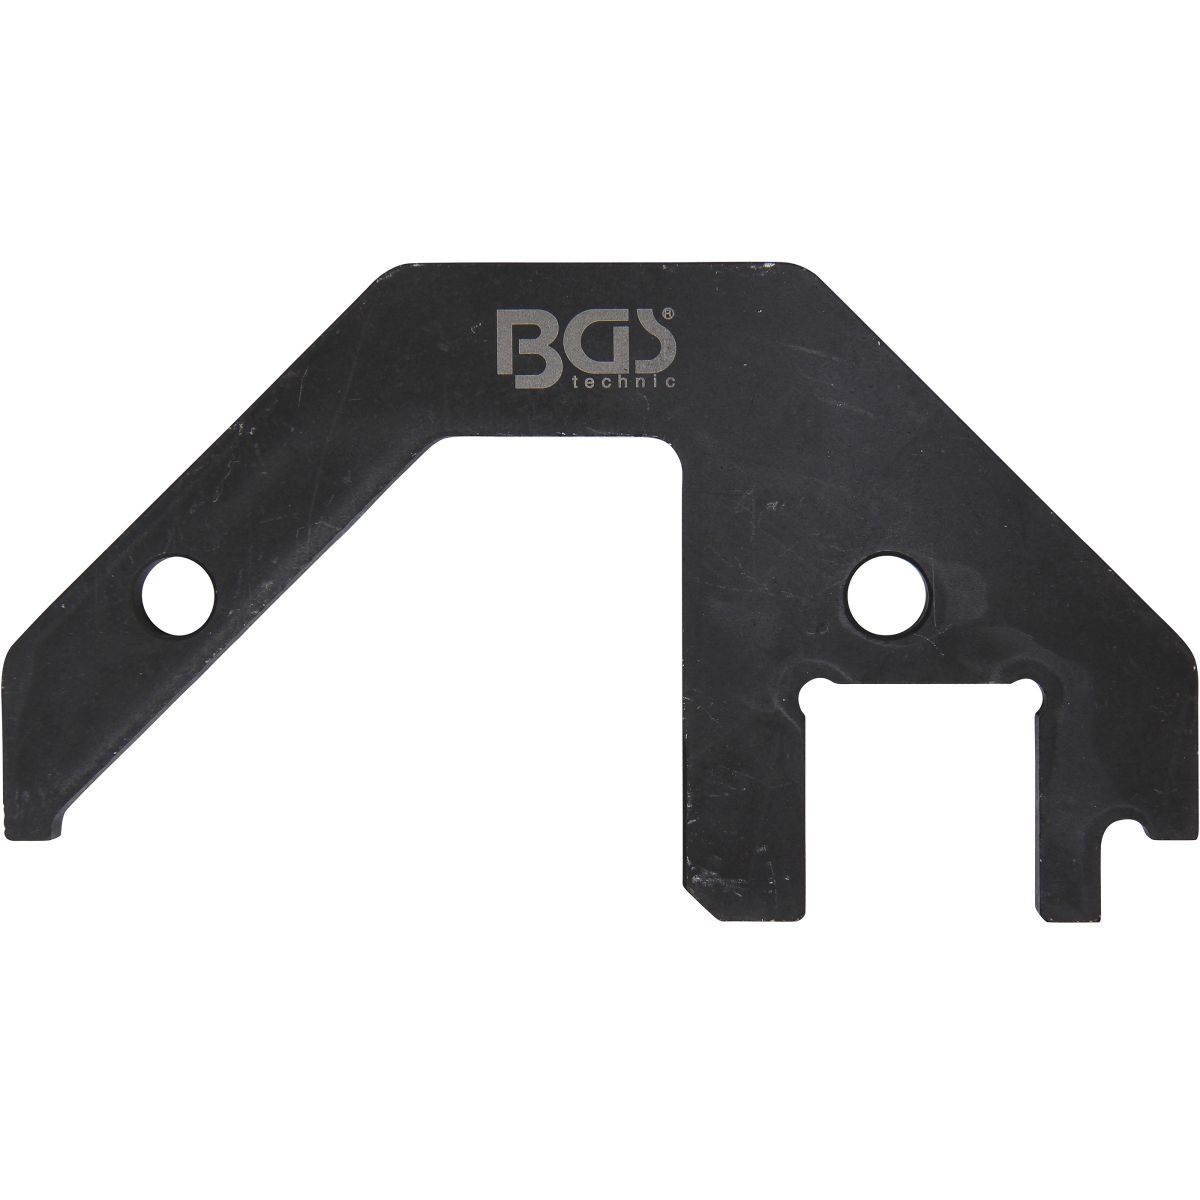 Camshaft Locking Tool | for BMW | for BGS 62616